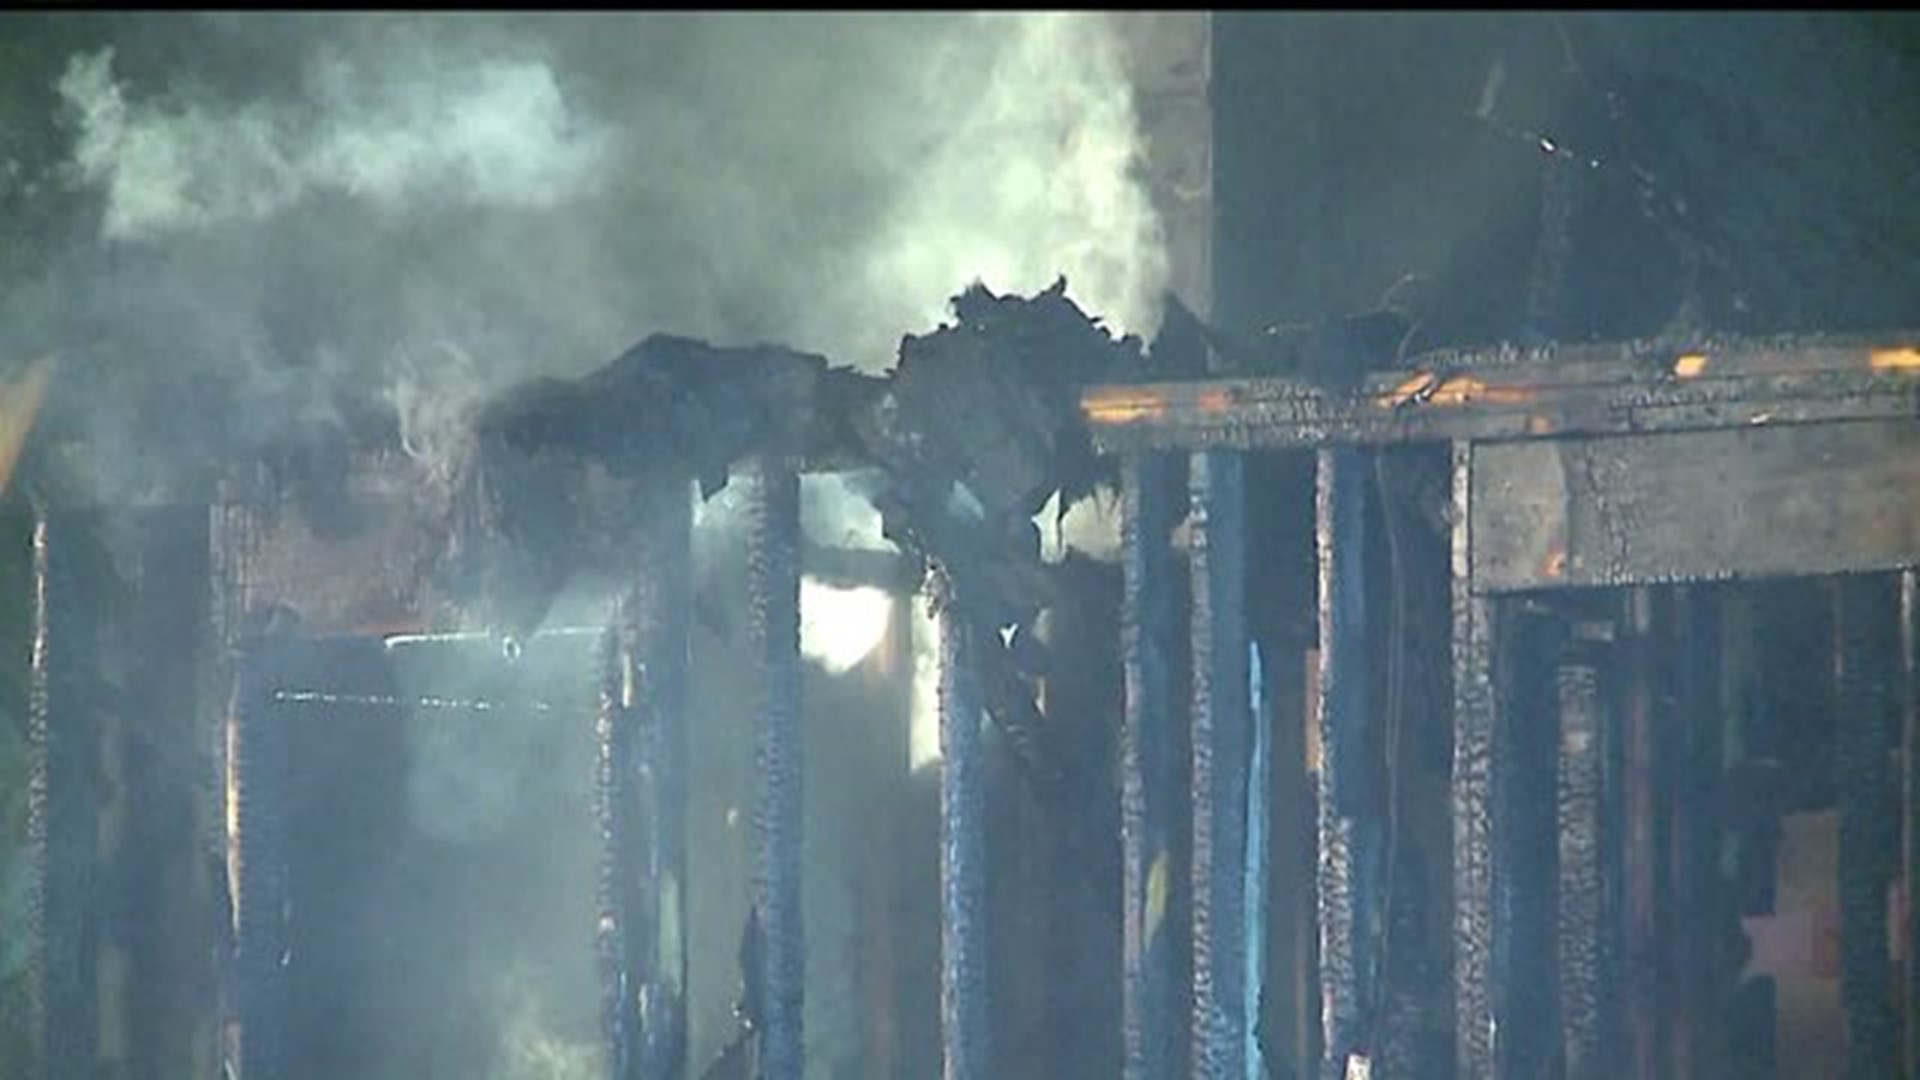 Overnight fire leaves one person in the hospital